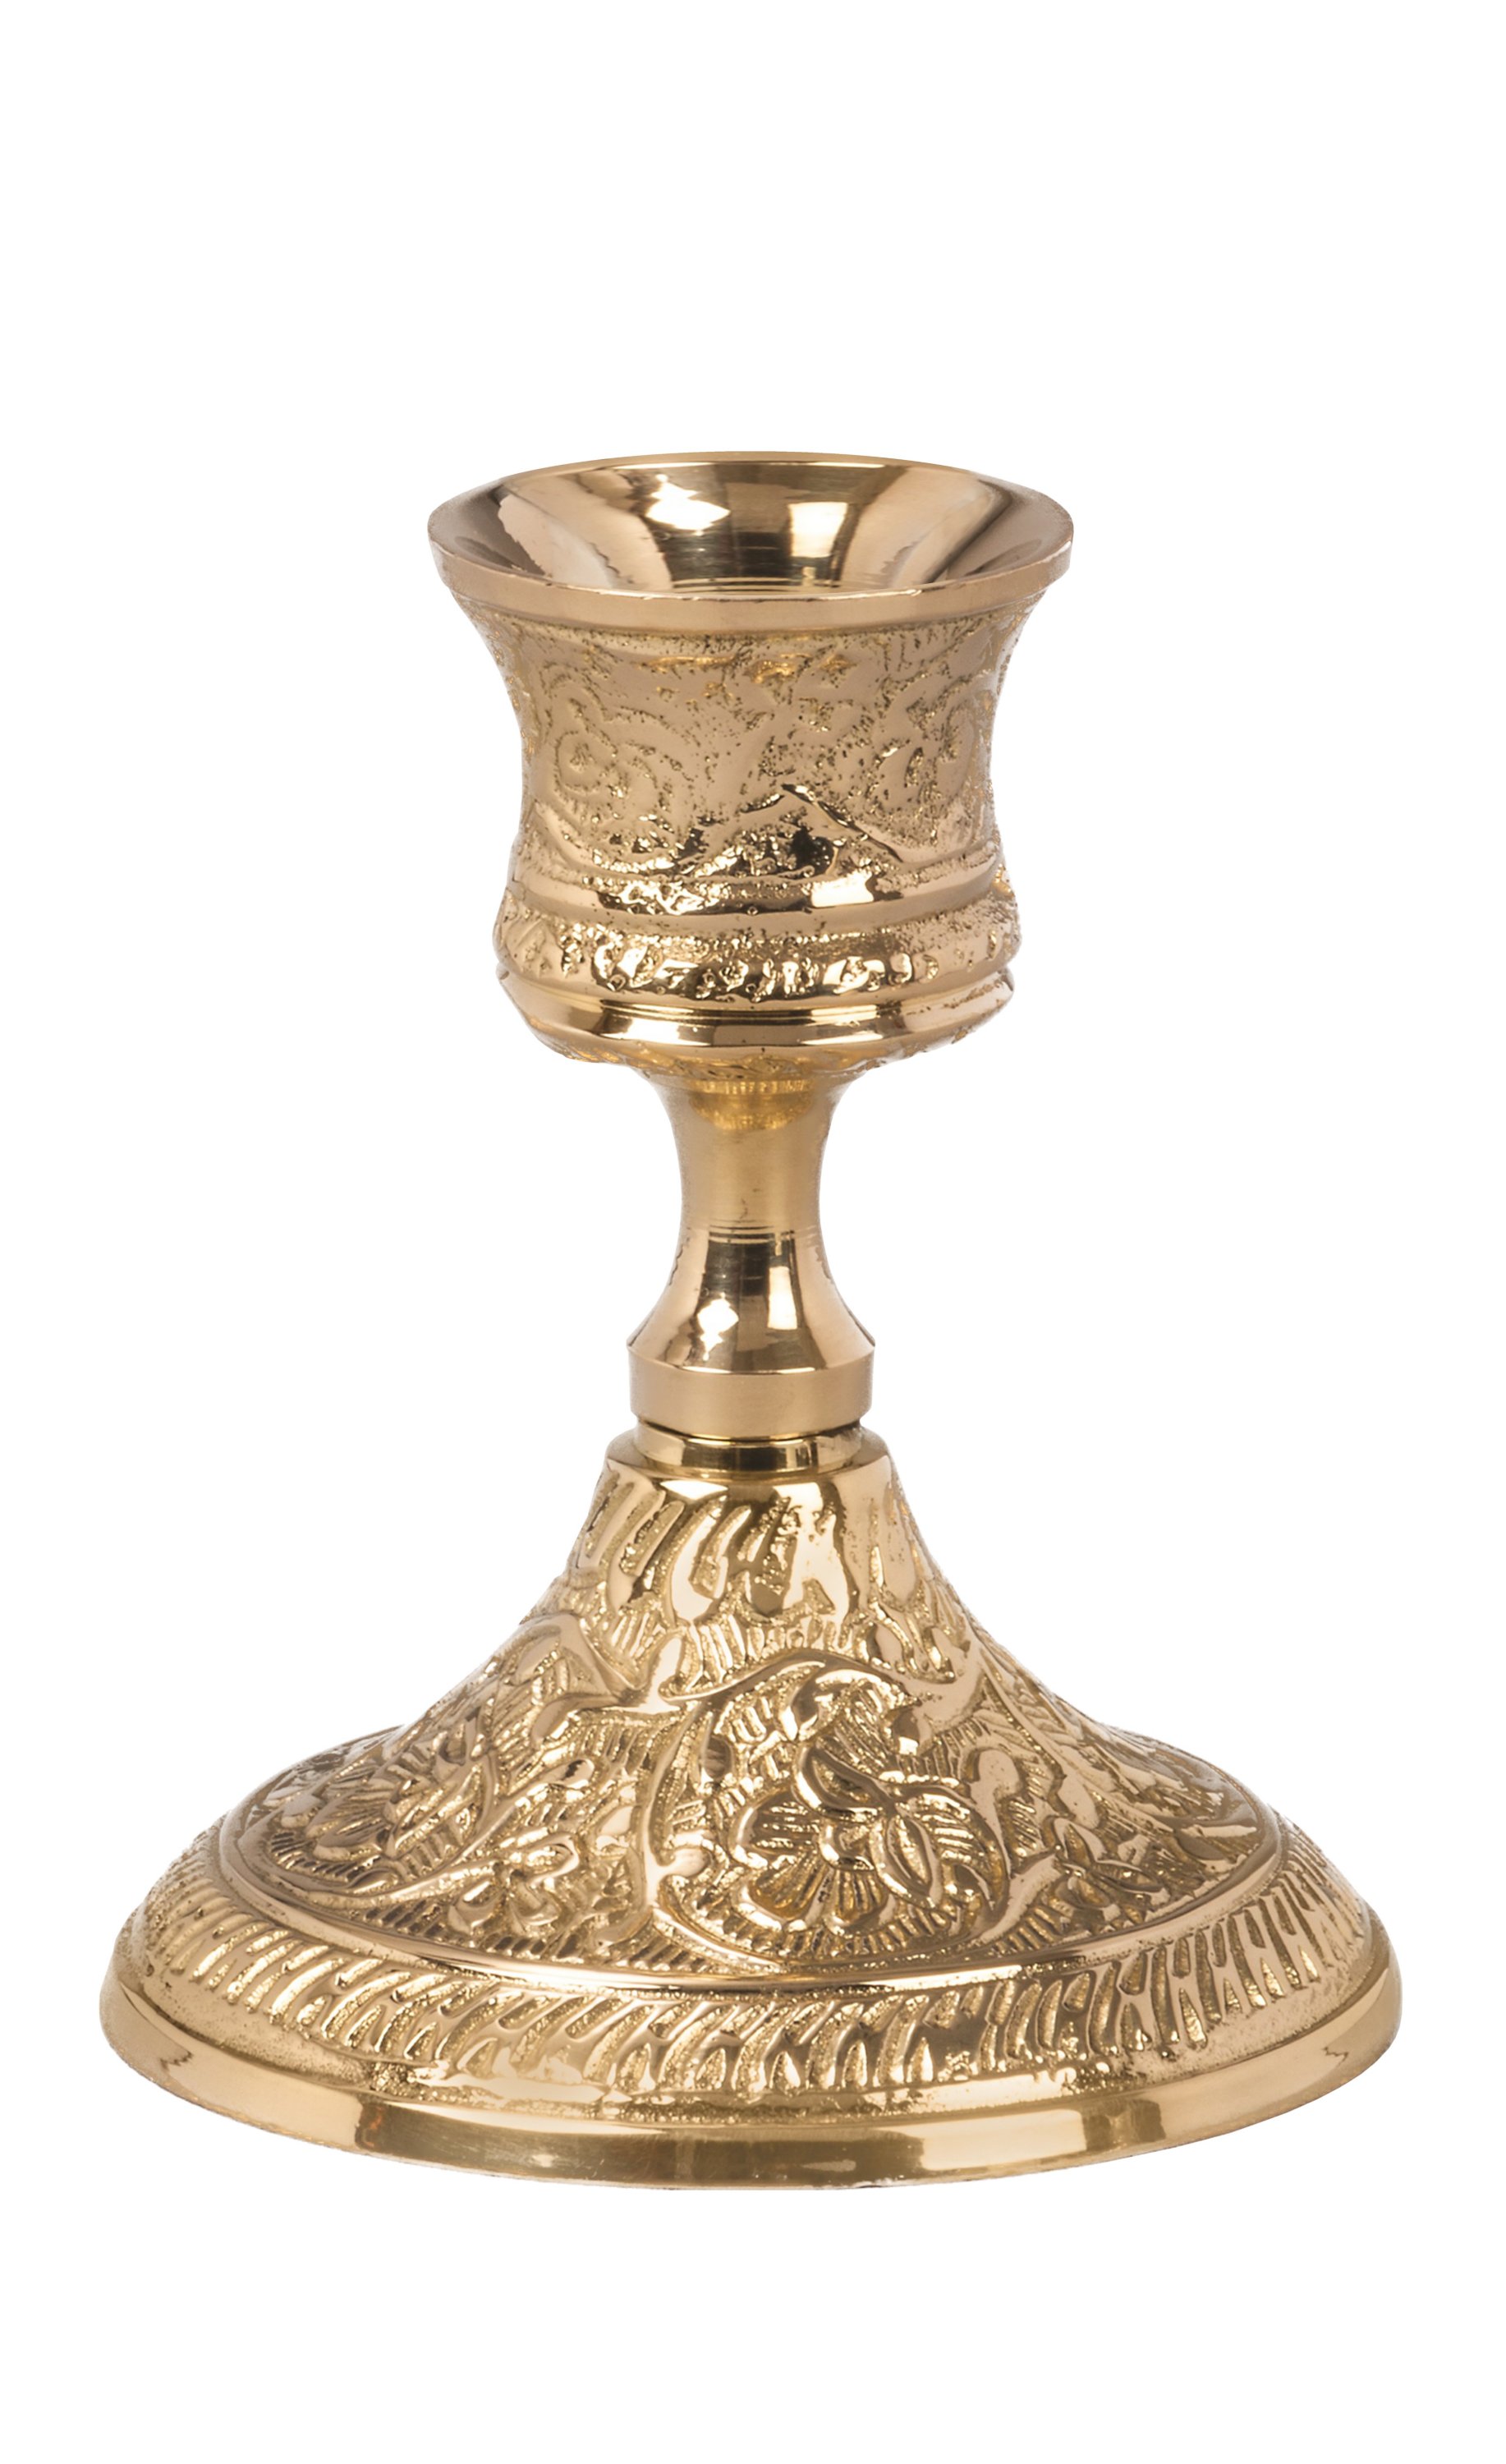 Shiney Brass Taper Candle Holder 3.75 Inch Metal Candlestick